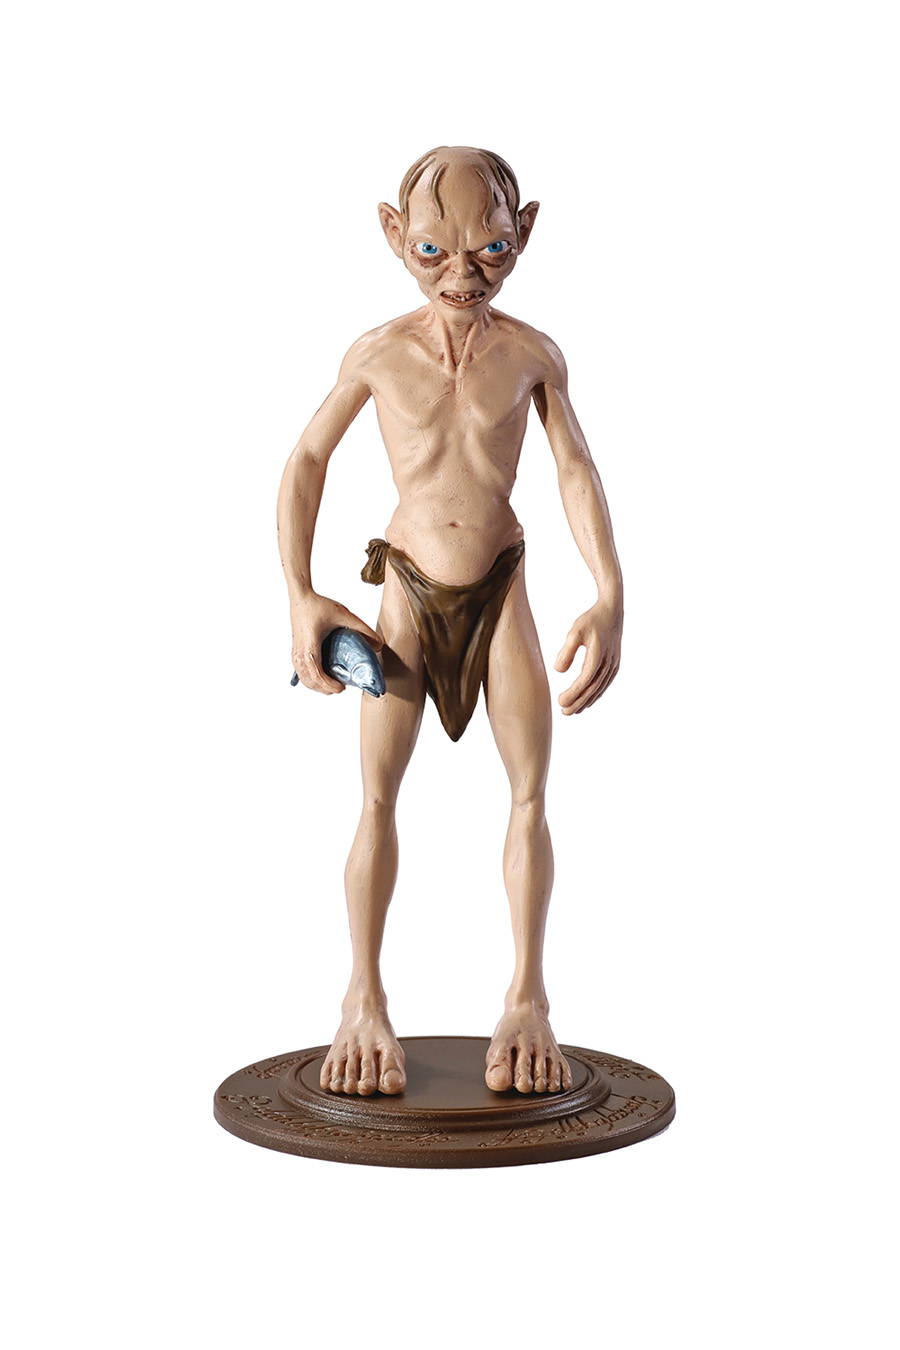 Lord Of The Rings Bendy Figure - Gollum